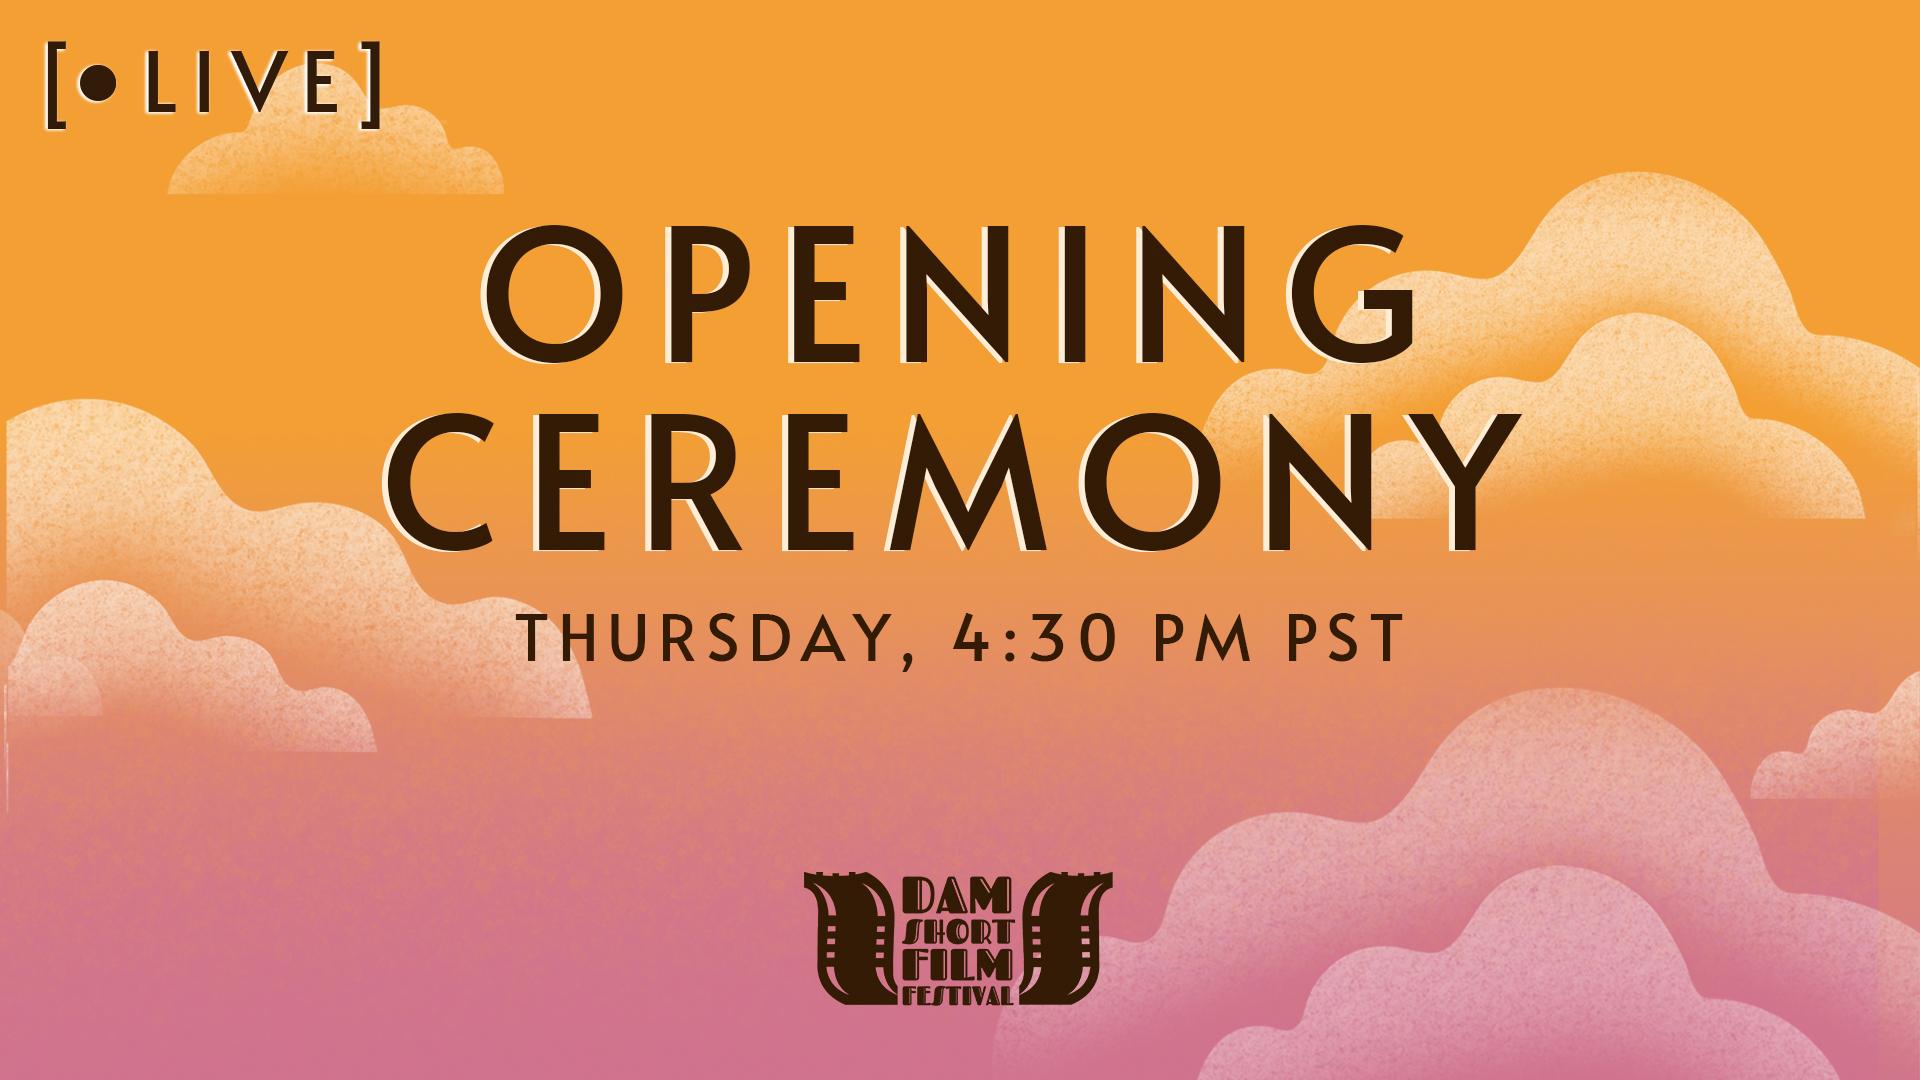 DSFF OPENING CEREMONY LIVE 4:30PM PST